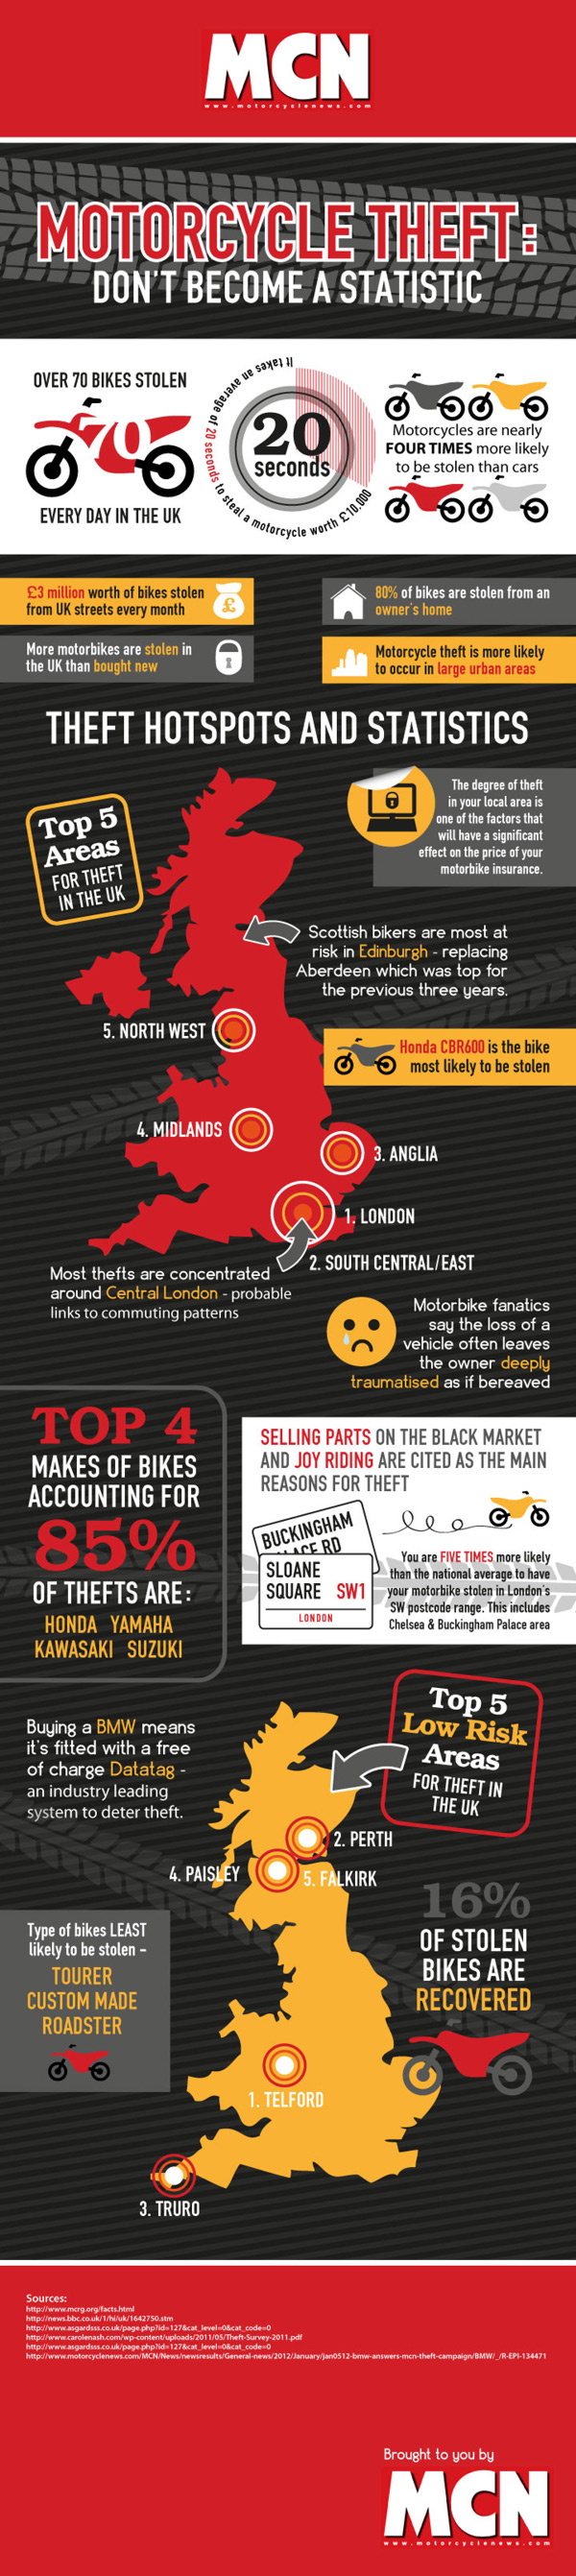 Motorcycle Theft - Don't Become A Statistic